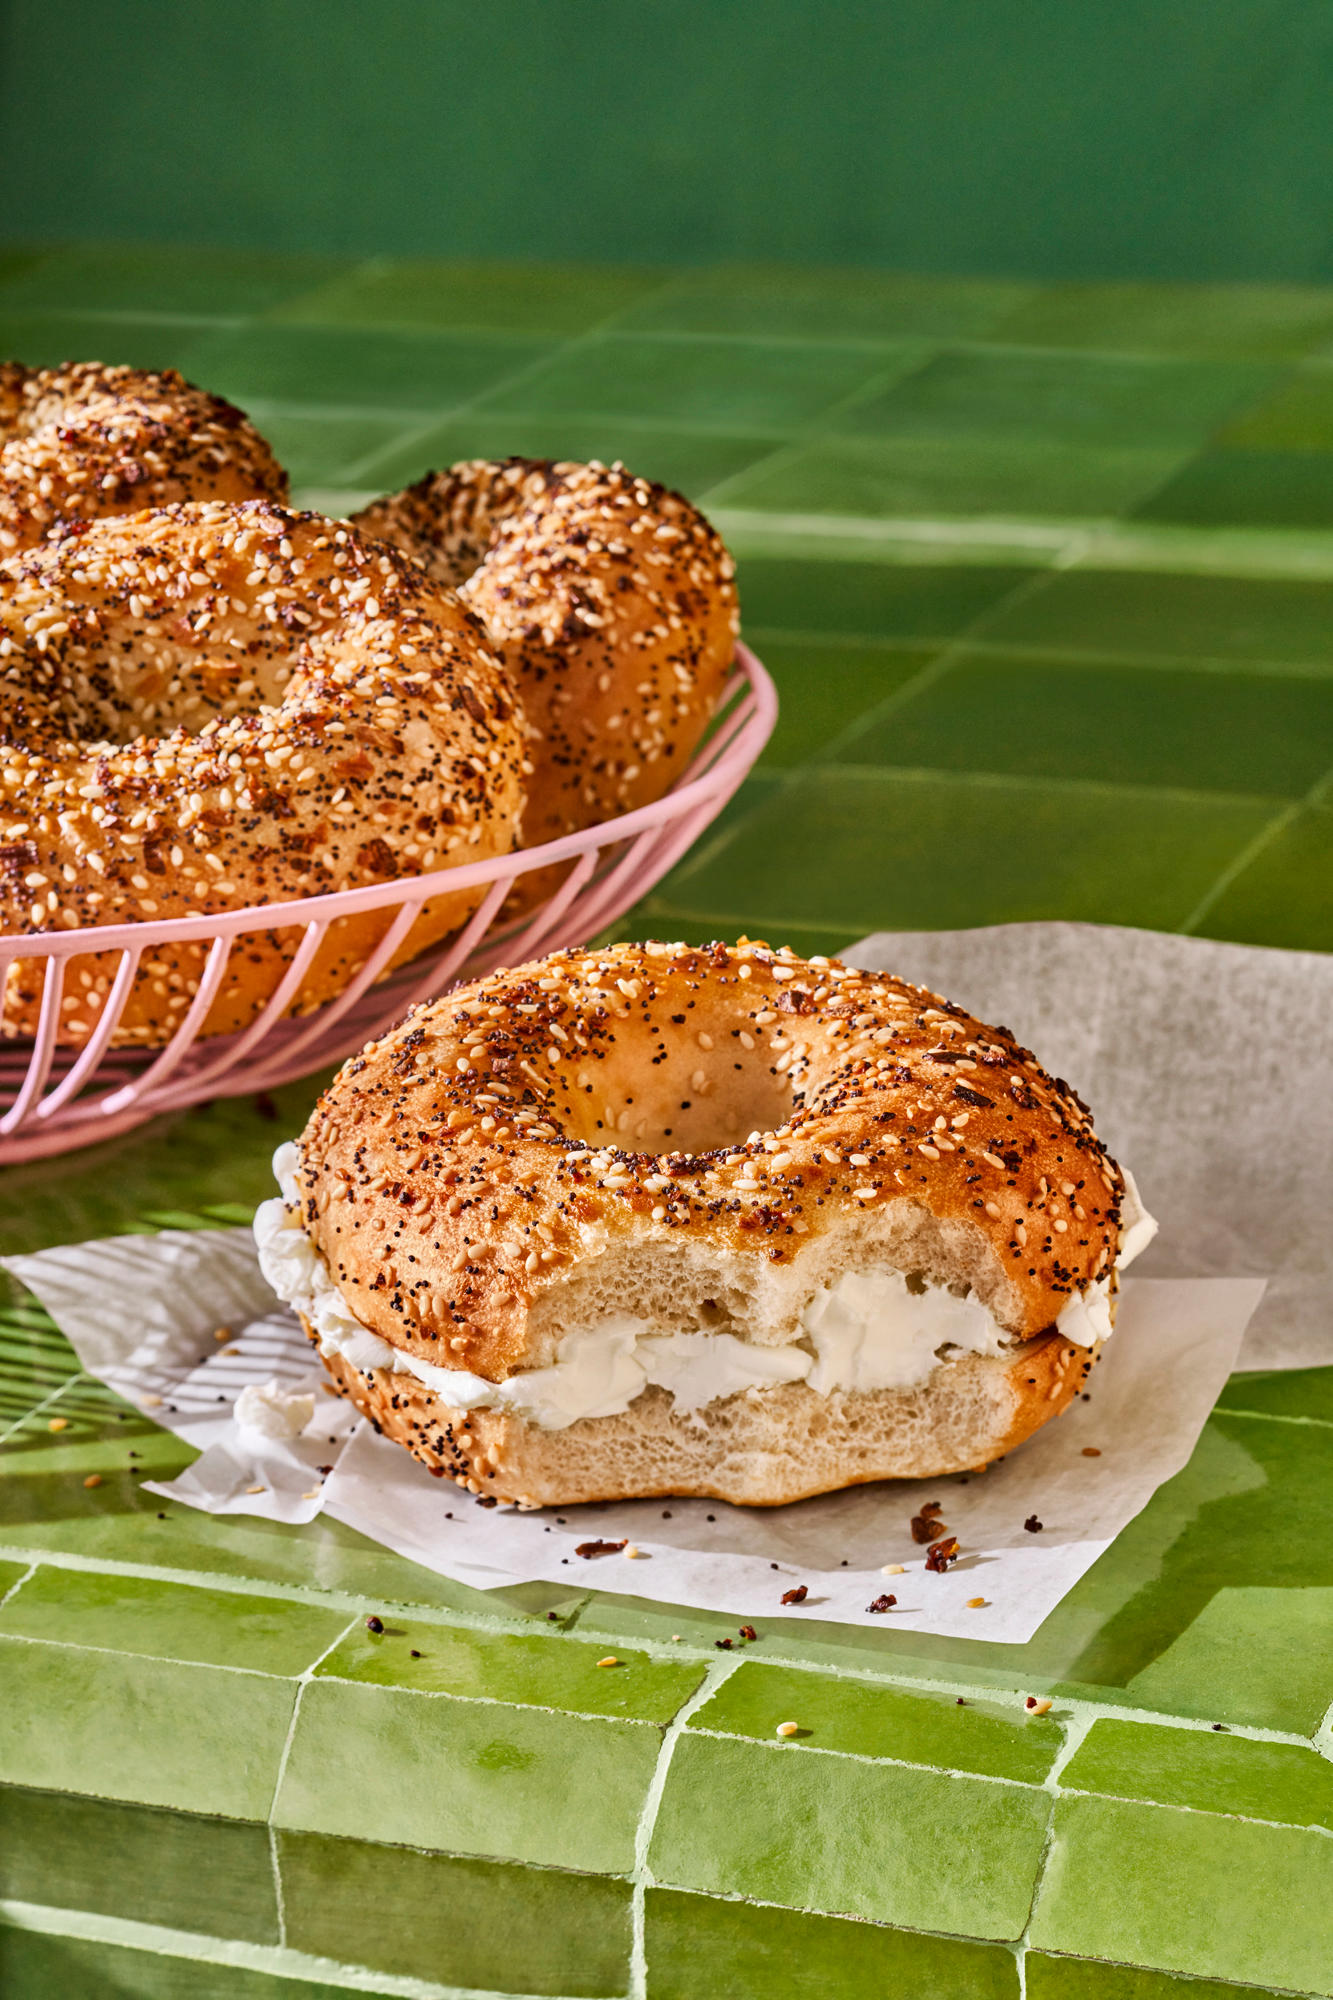 Everything Bagel with Plain Cream Cheese Panera Bread Louisville (502)423-7343